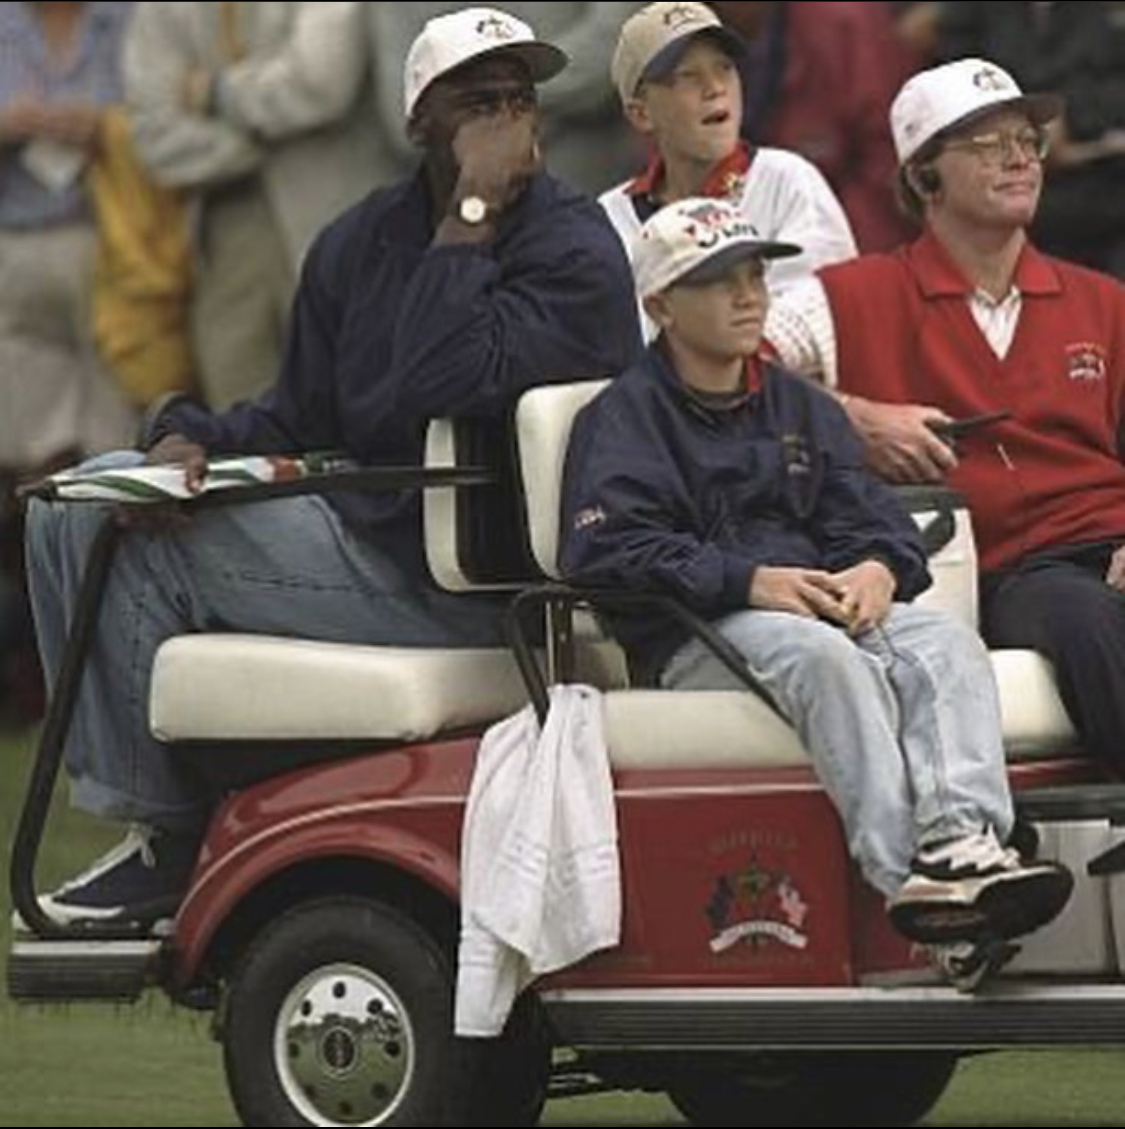 Ryder Cup, Spain on 1997 from Andrew Redington/Getty